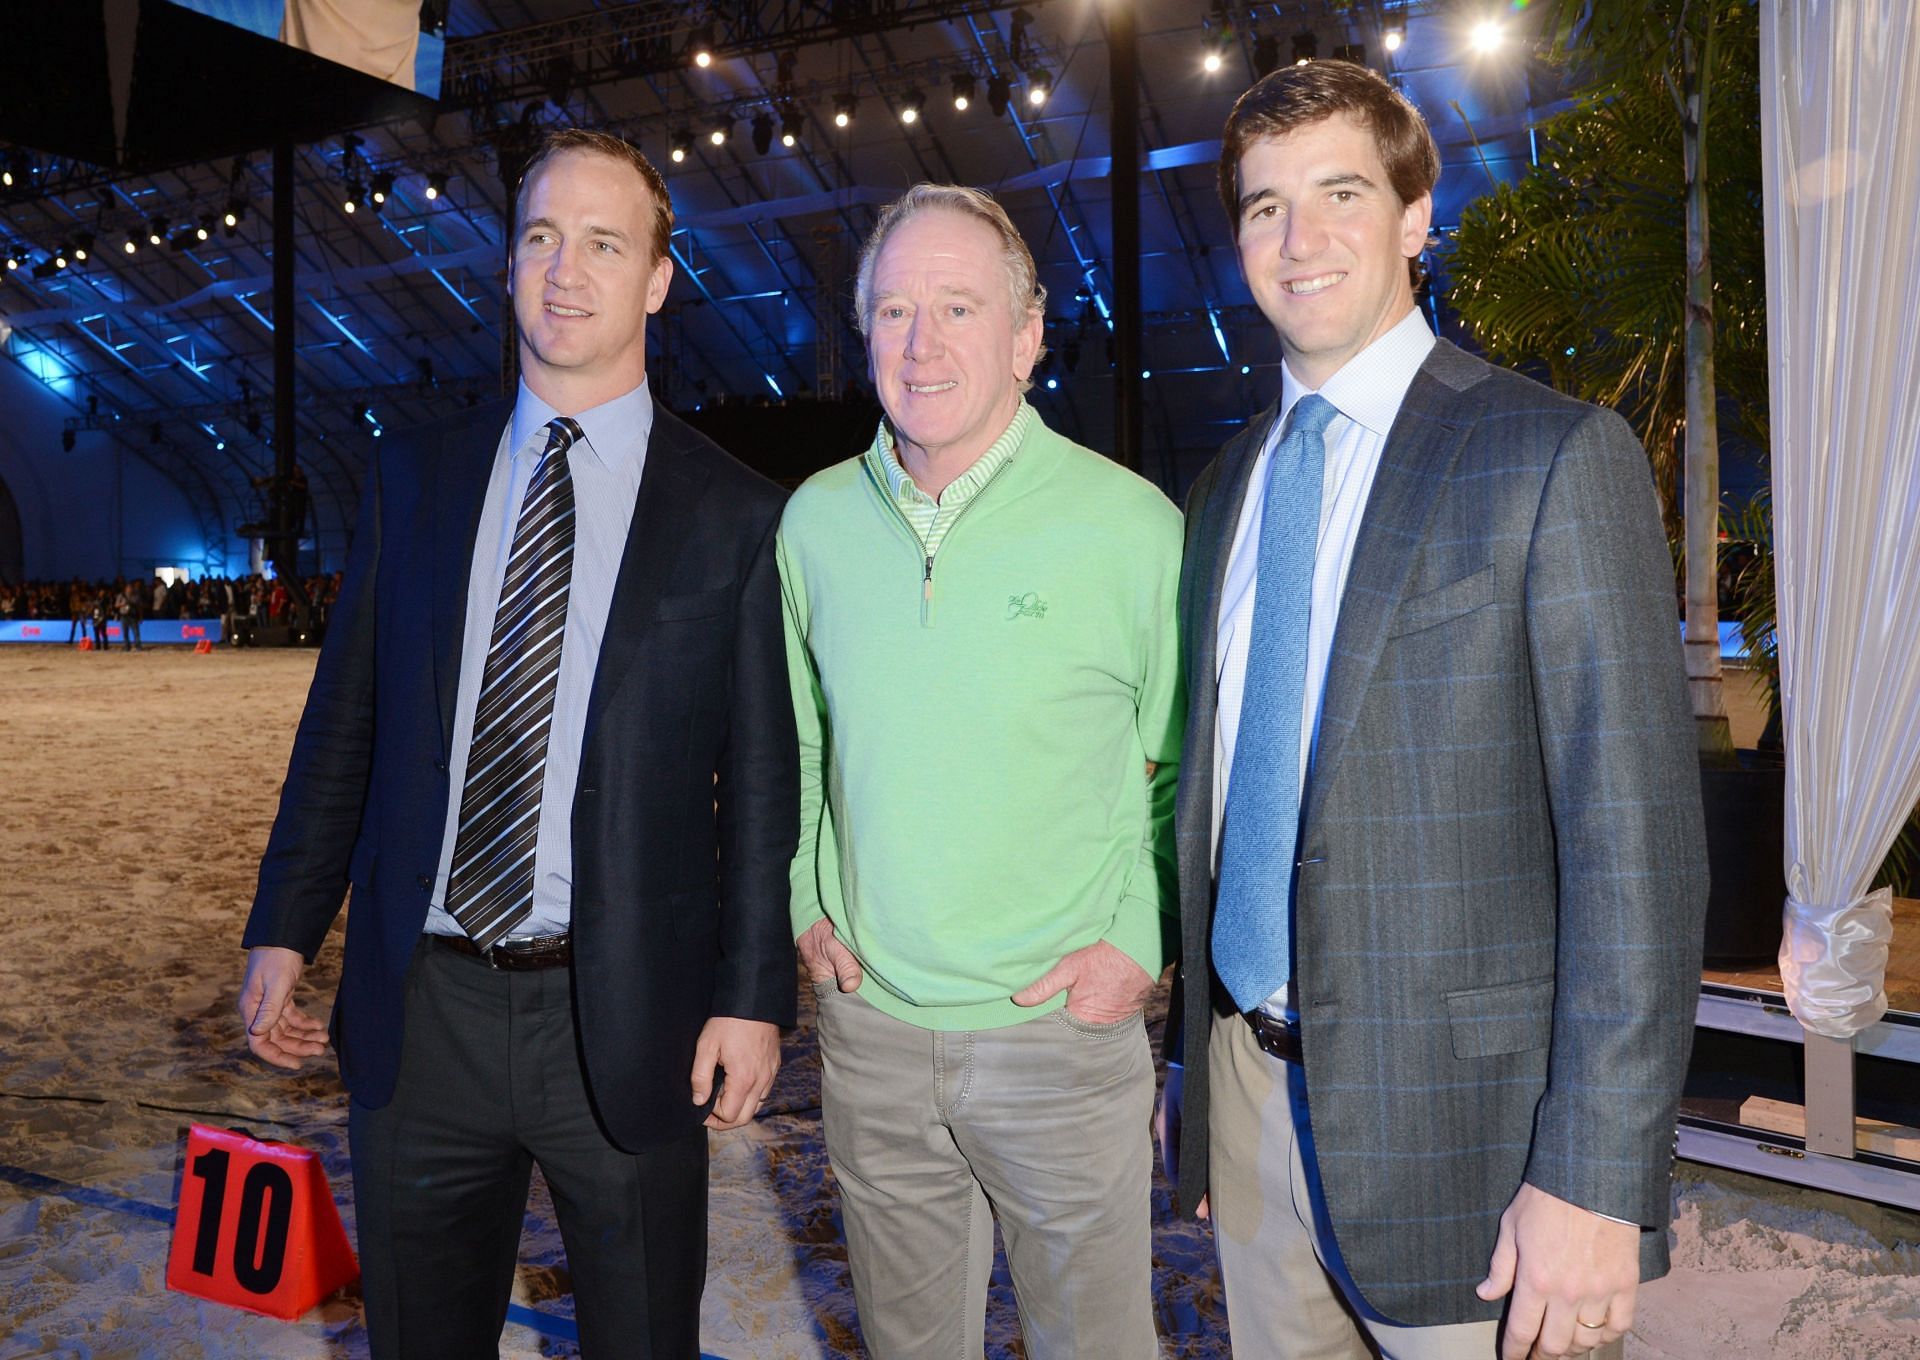 Peyton (l), Archie (c), and Eli at a celebrity event